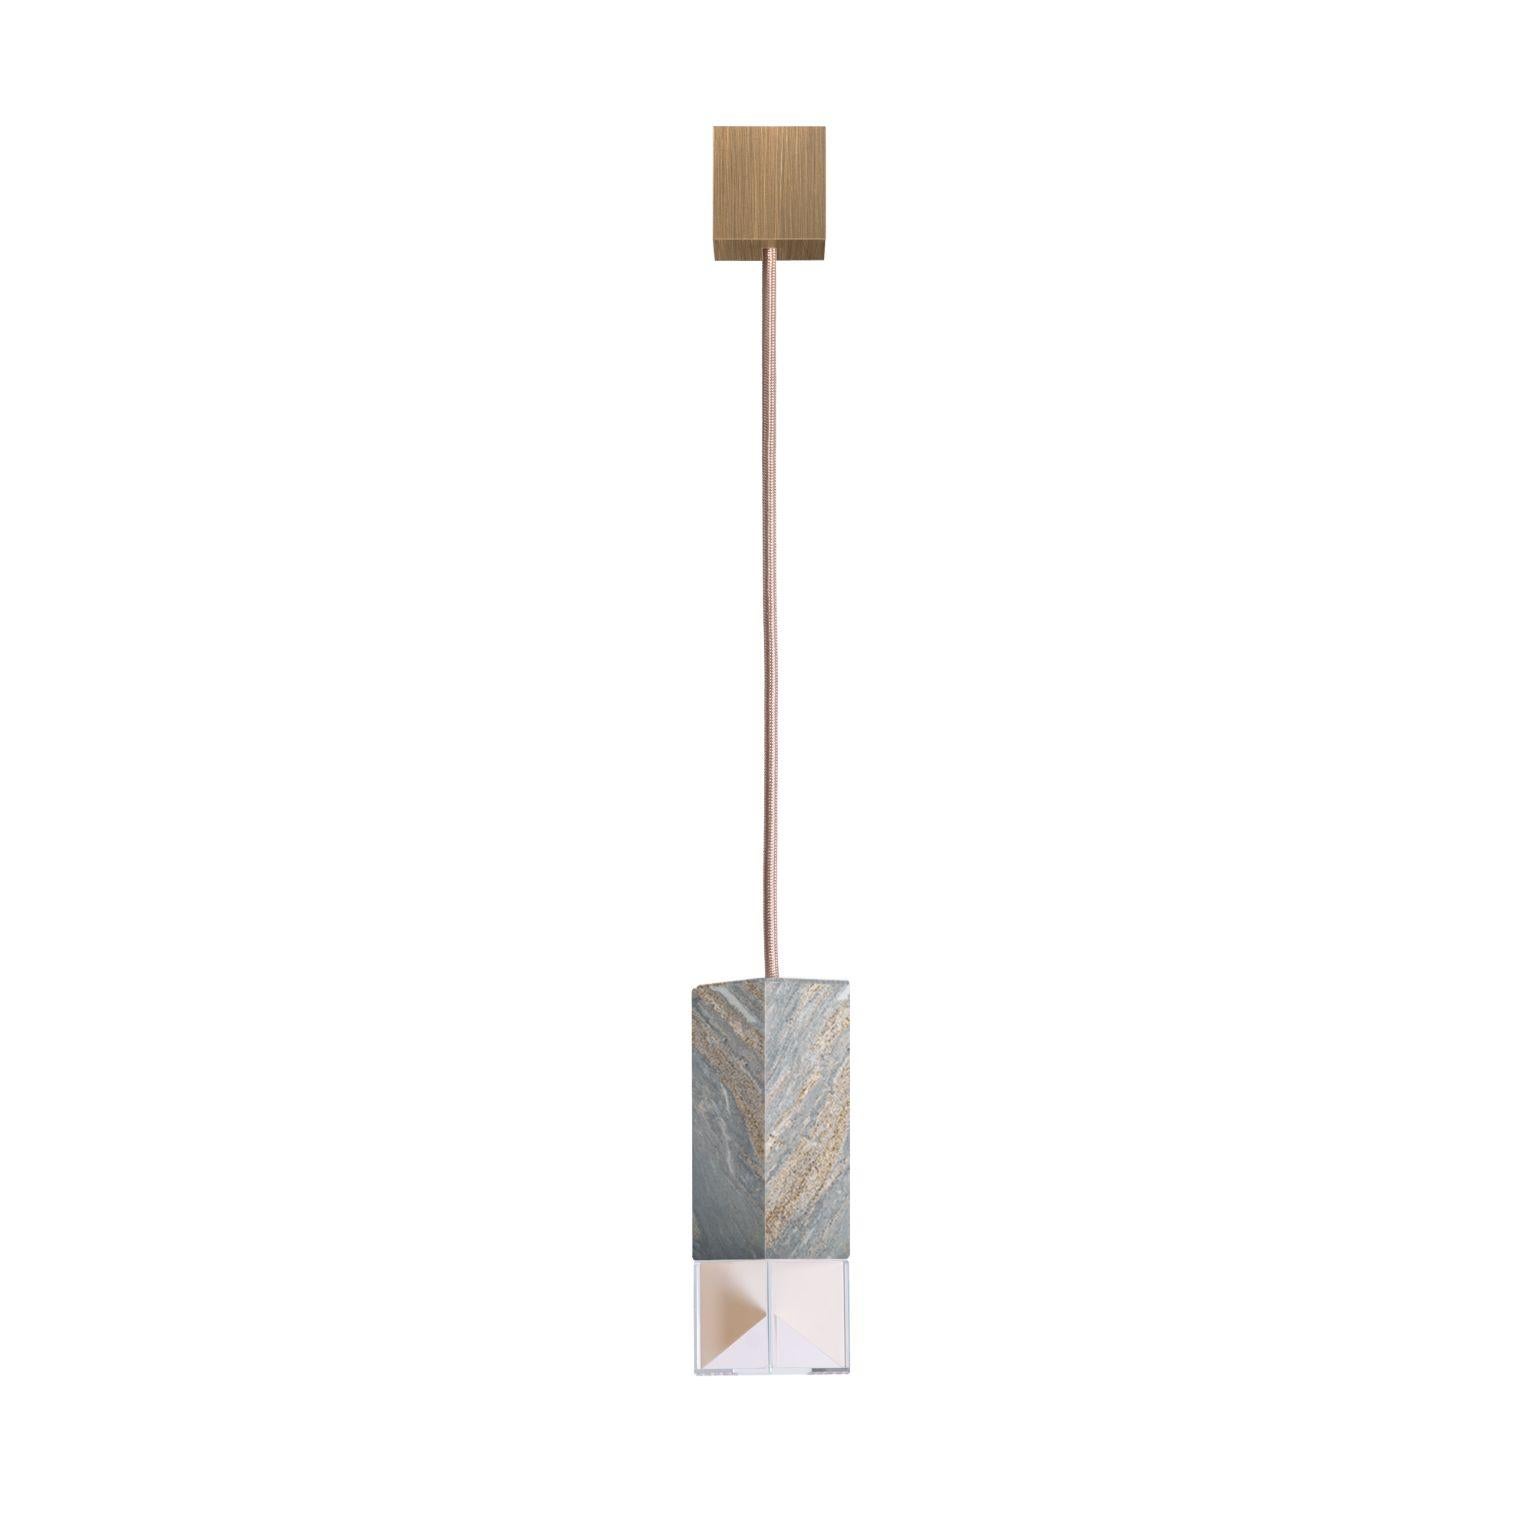 Lamp One Marble 01 Revamp Edition by Formaminima
Dimensions: D 5 x W 5 x H 17 cm.
Materials: Body lamp: handcrafted solid Palissandro Blu Nuvolato, polished finish, Crystal glass diffuser, Limoges porcelain sheets, biscuit-finish. Ceiling rose of